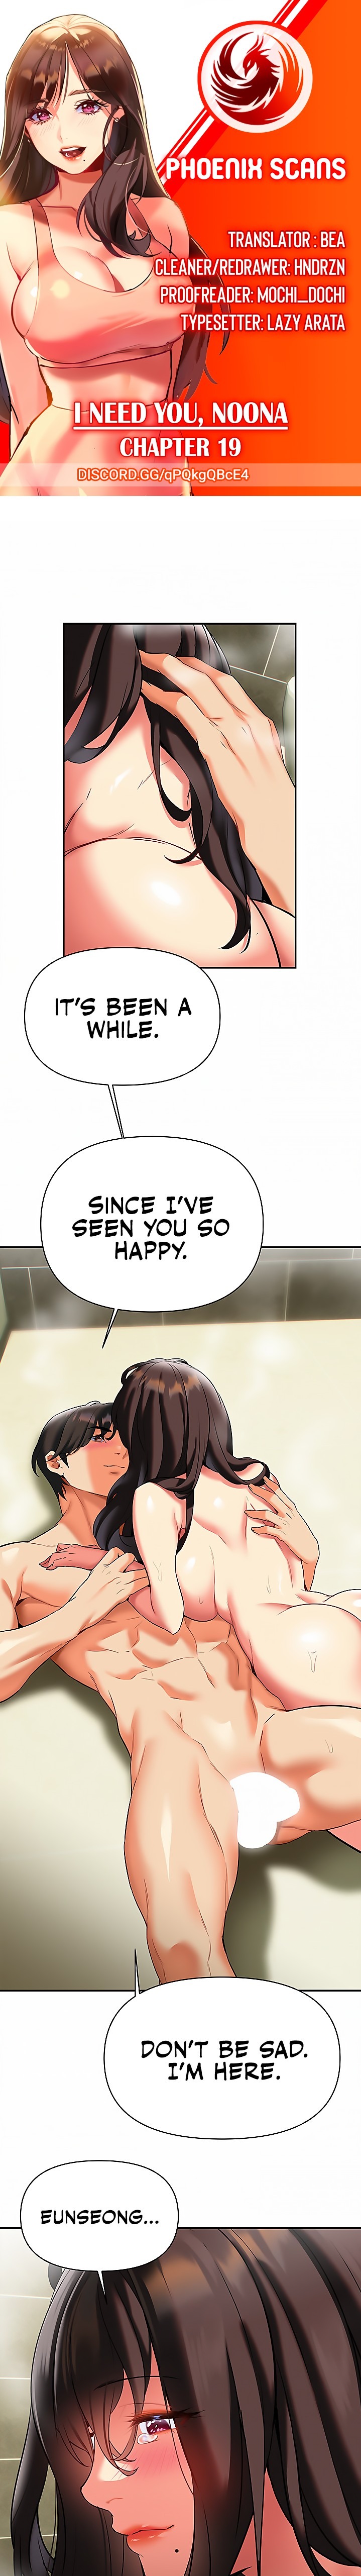 I Need You, Noona - Chapter 19 Page 1